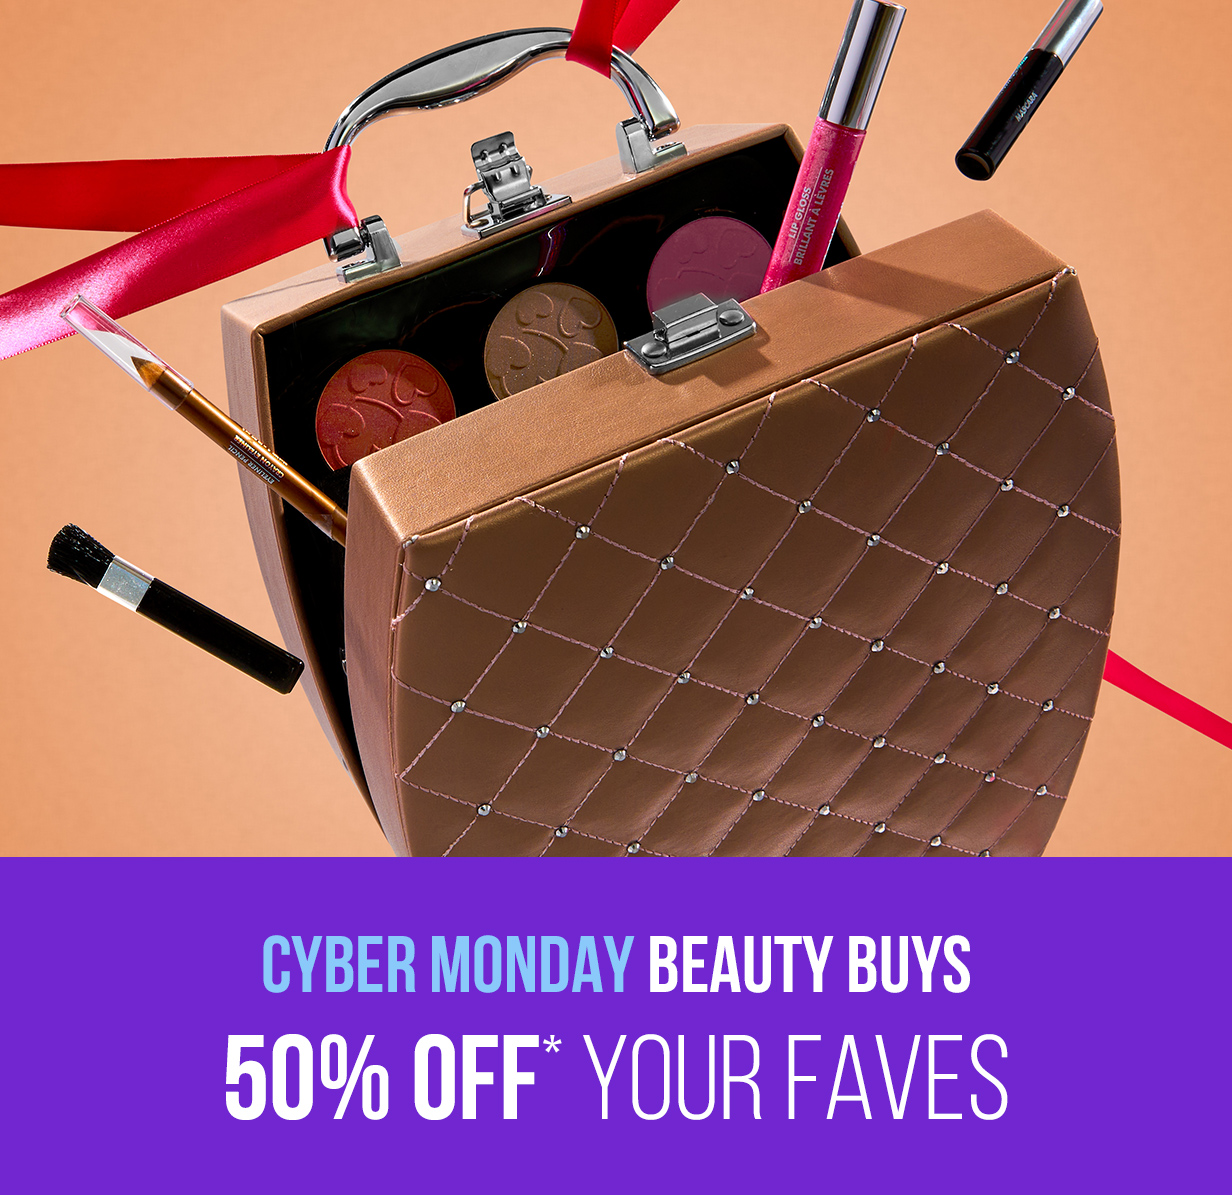 Cyber Monday Beauty Buys 50% Off Your Faves